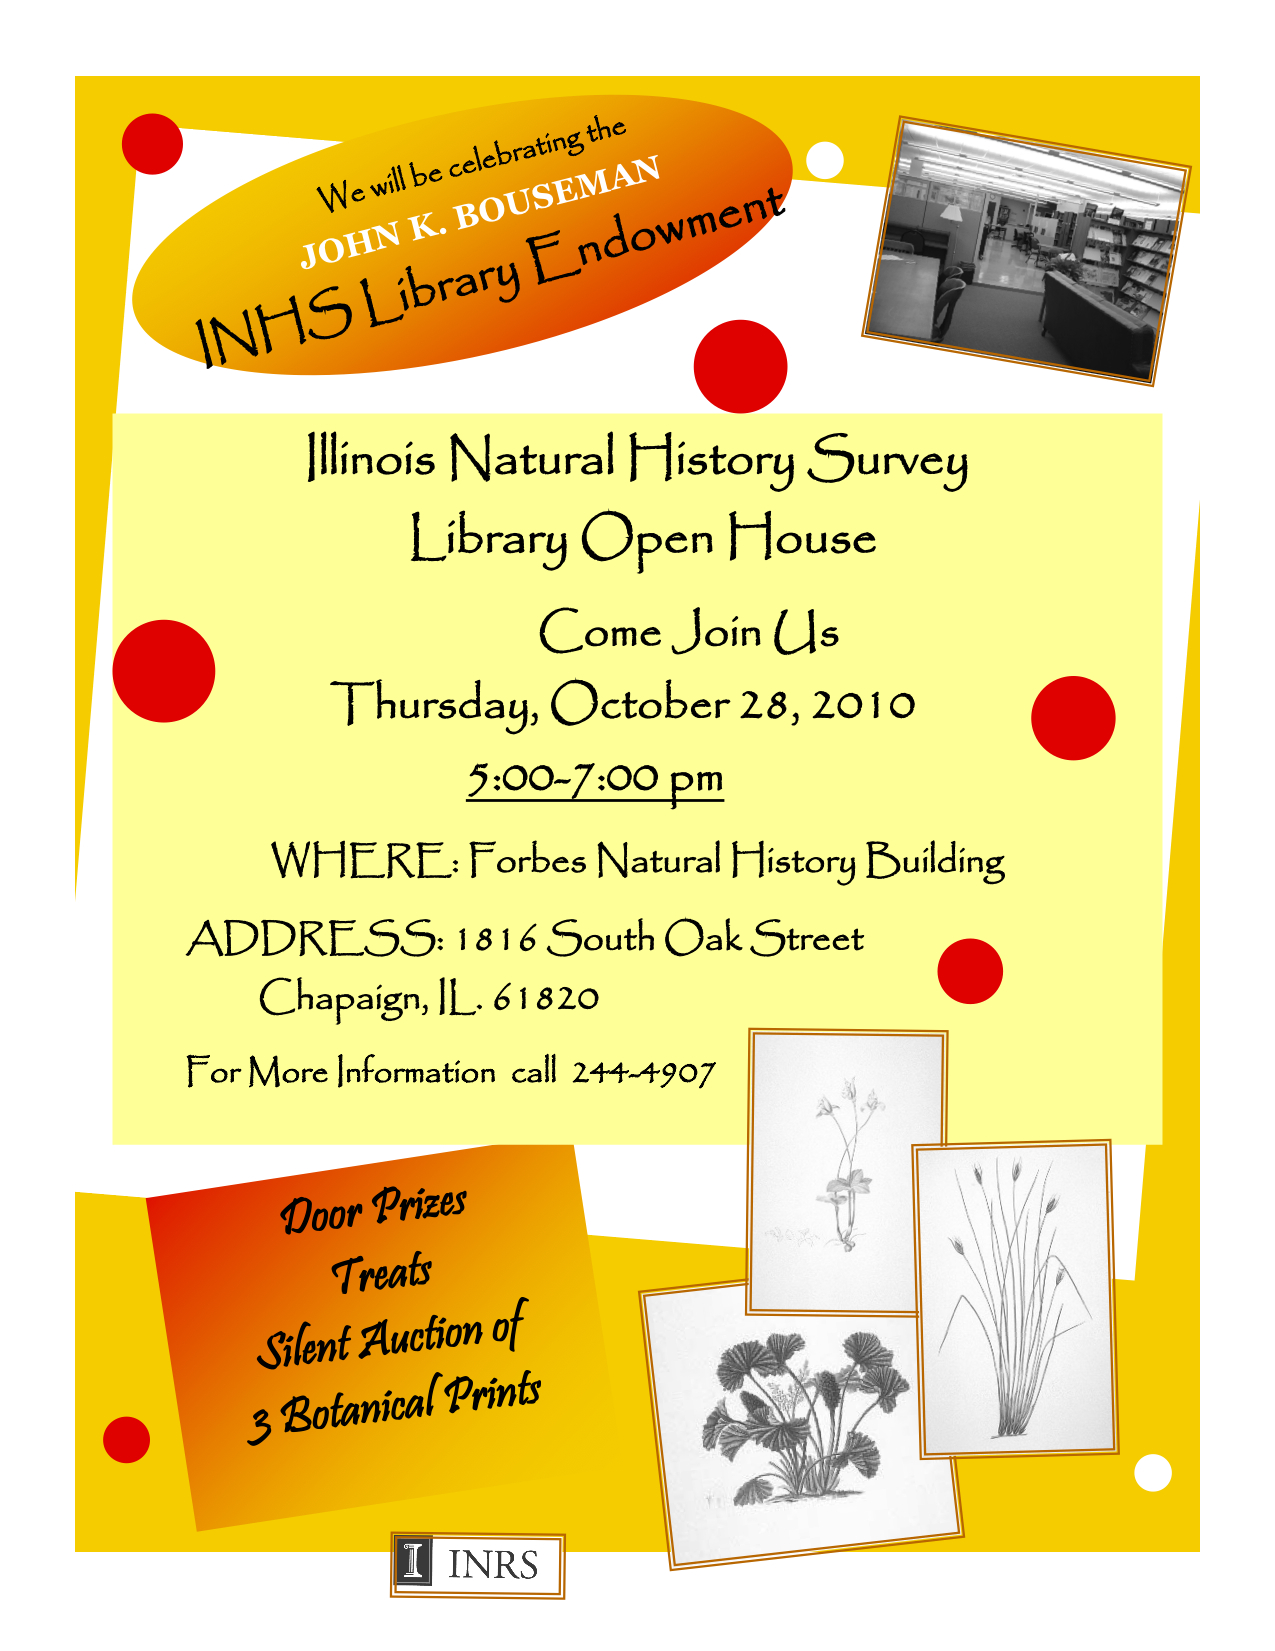 Illinois Natural History Survey Library Open House